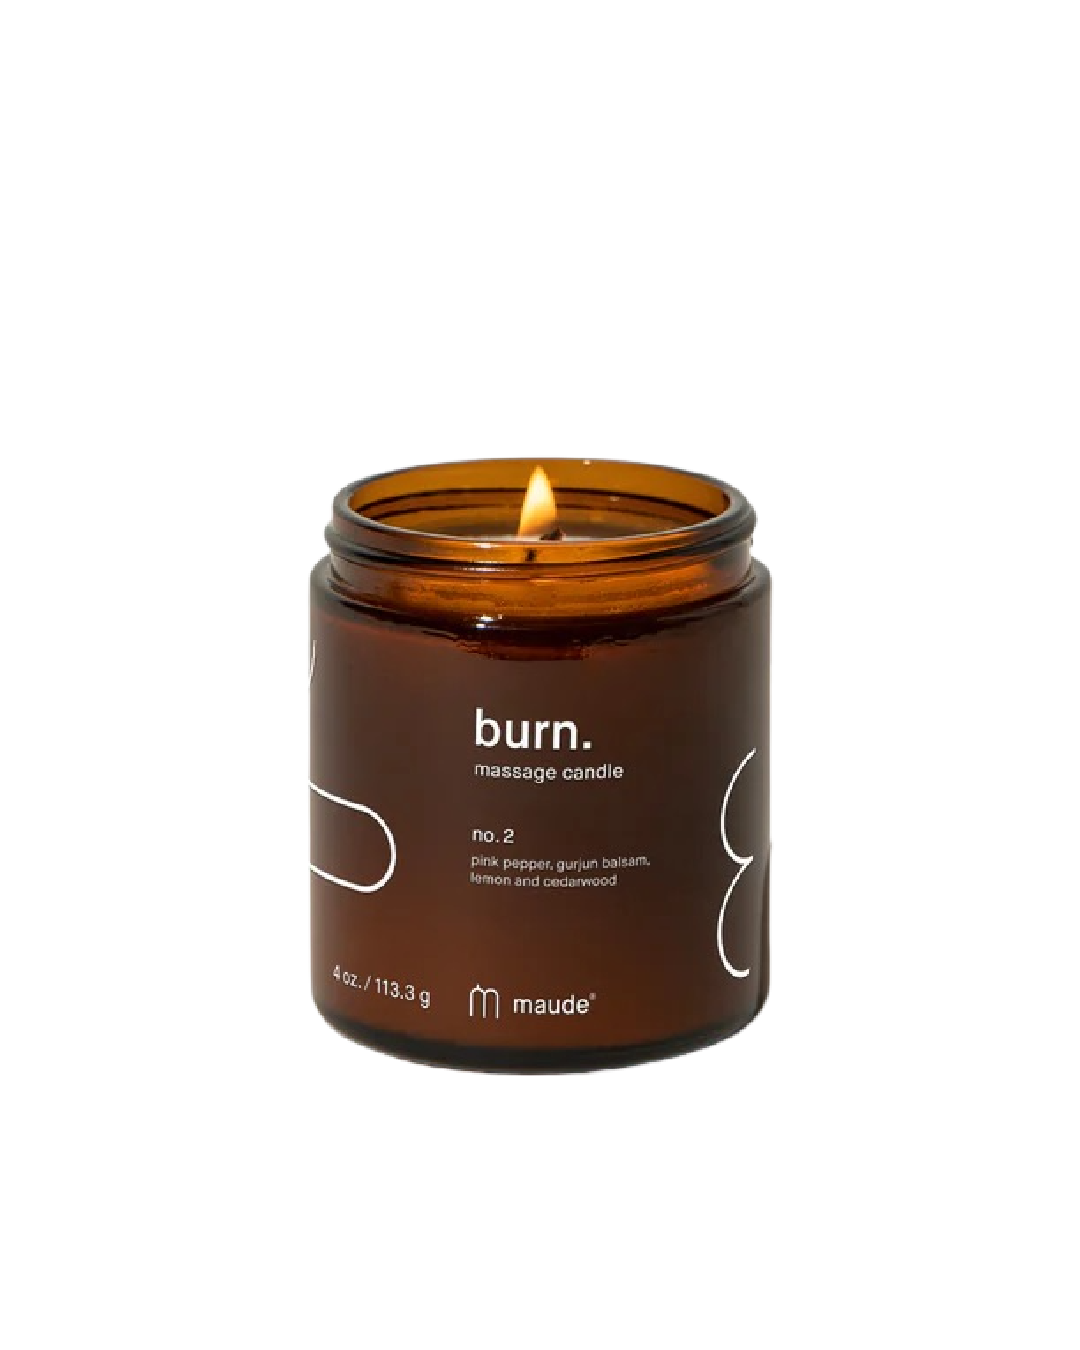 Maude Massage Candle in Burn No. 2